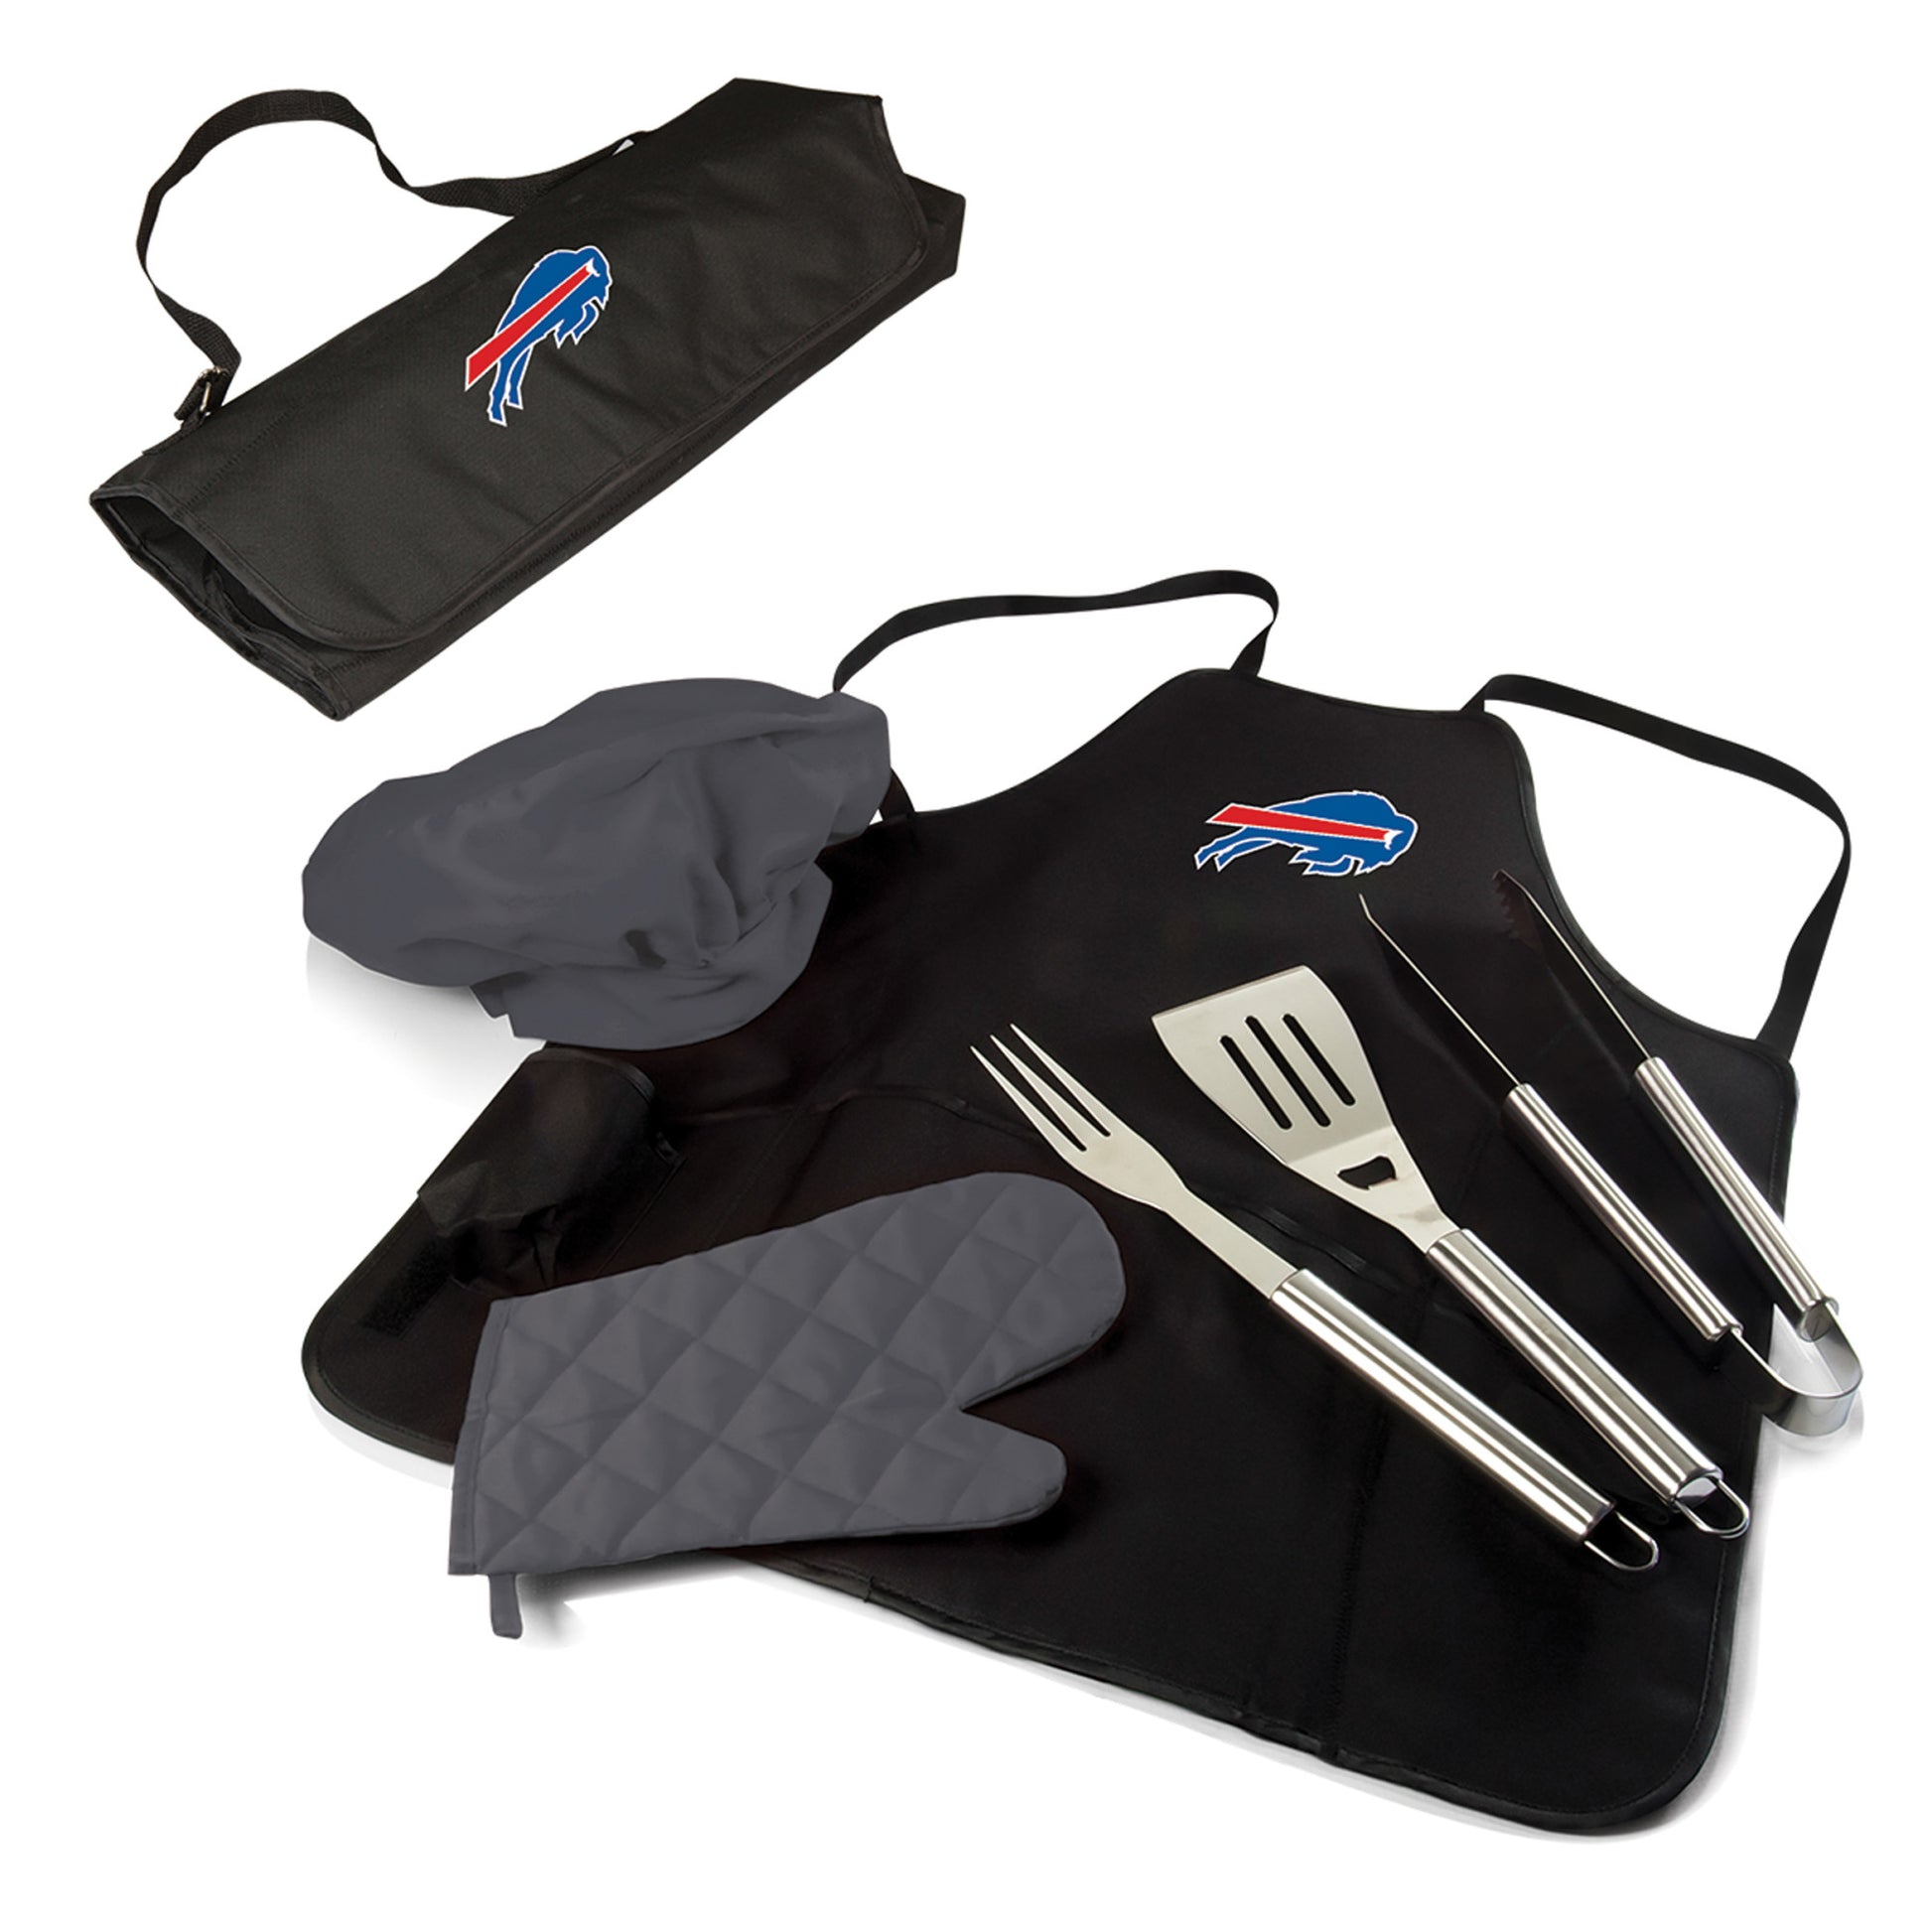 Buffalo Bills BBQ Apron Tote Pro: Durable polyester tote with grilling tools. Officially licensed NFL gear by Oniva/Picnic Time.